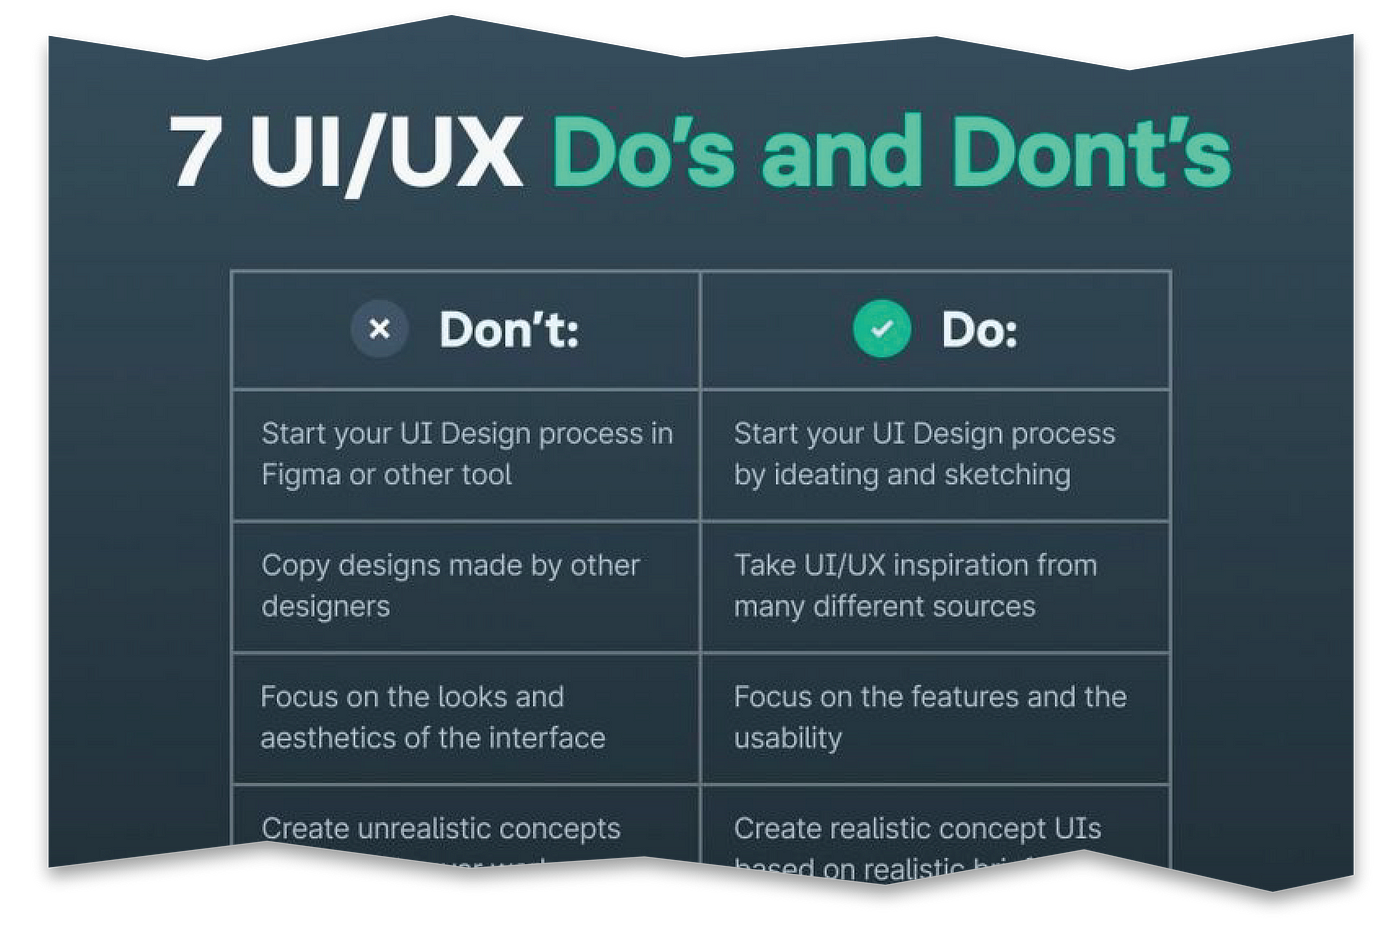 Snippet of a list titled “7 UI/UX Do’s and Dont’s”. First entry is “Don’t start your UI design process in Figma or other tool” / “Do start your UI design process by ideating and sketching.”